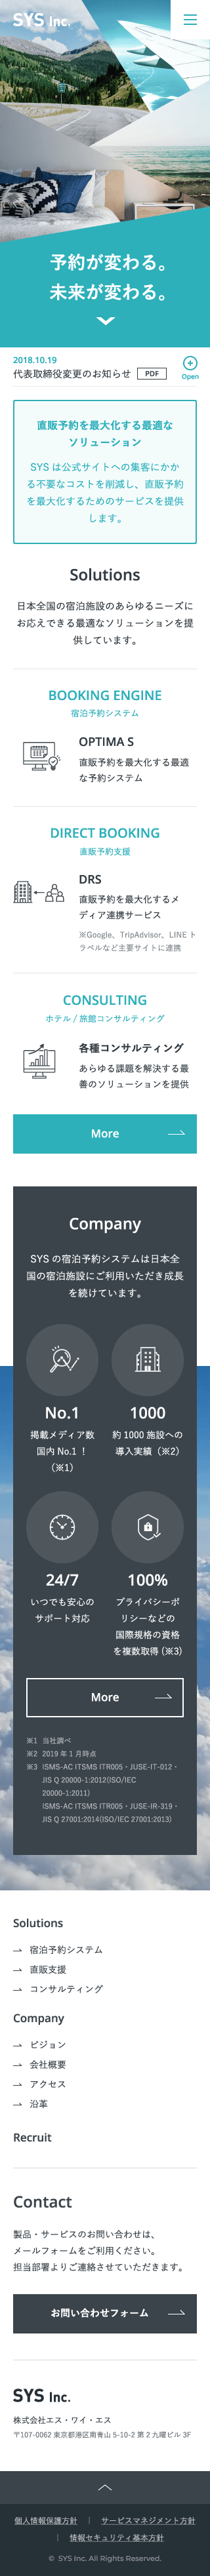 SYS Inc.